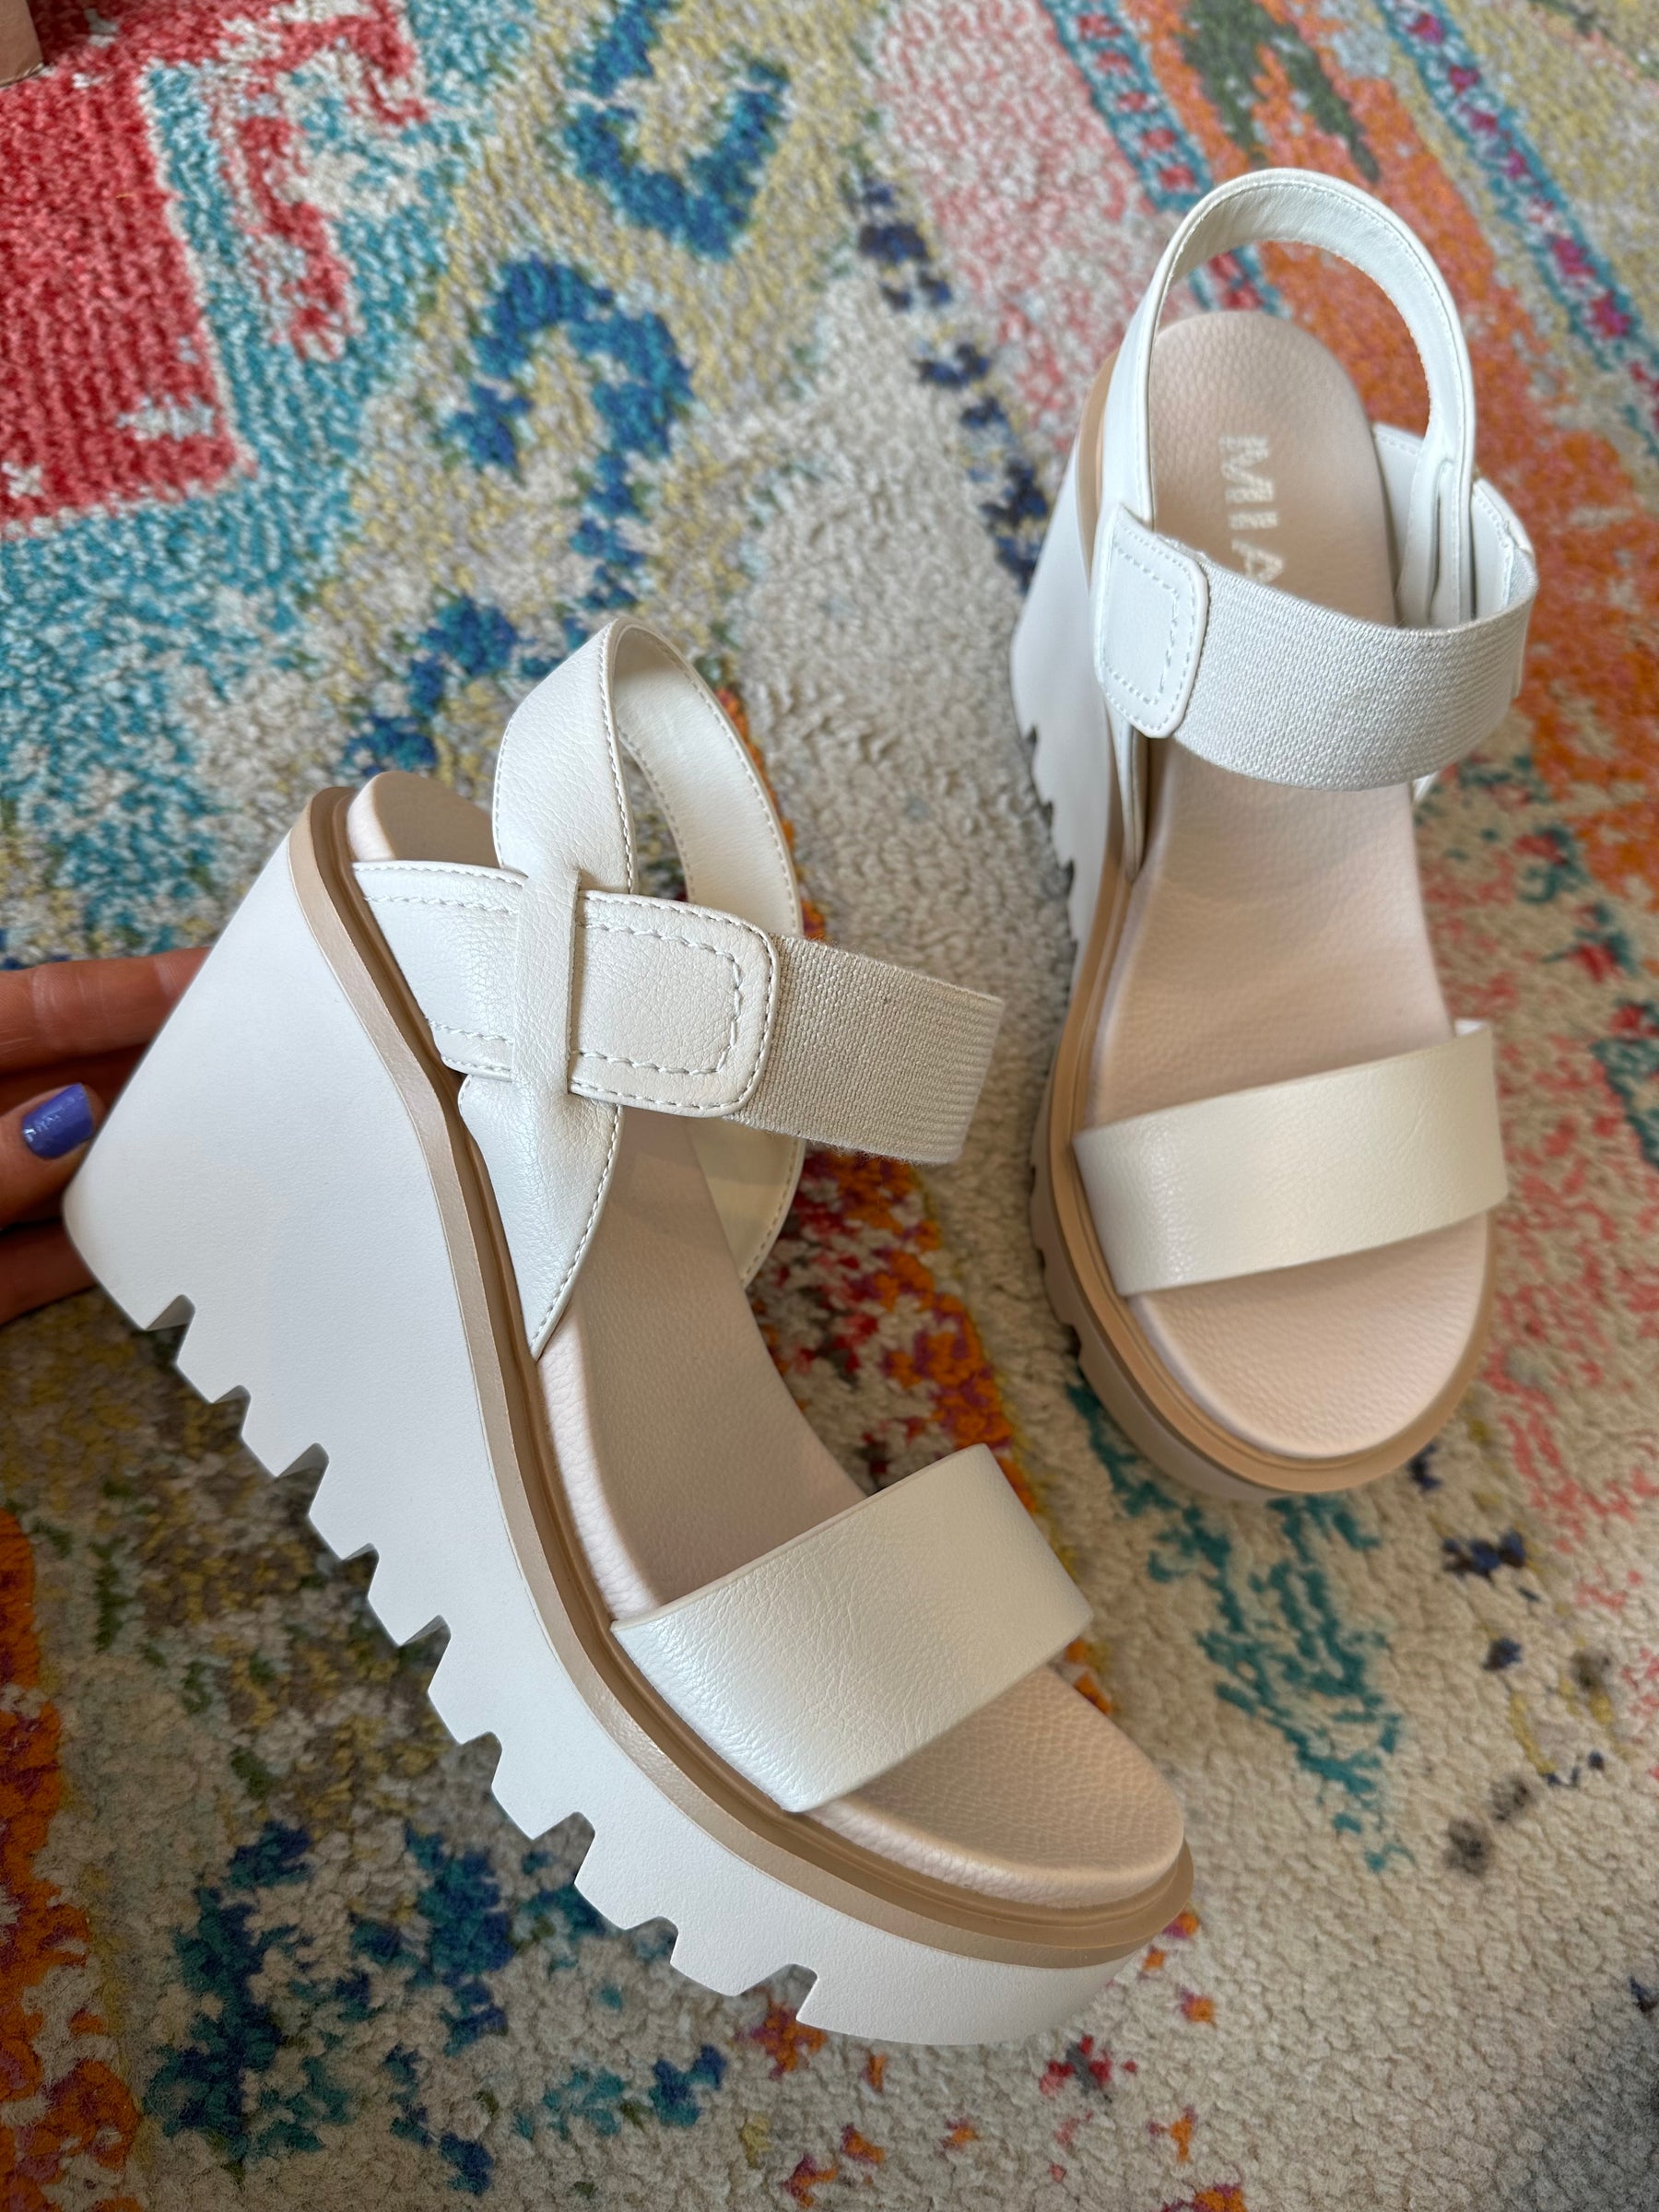 Lily Wedges